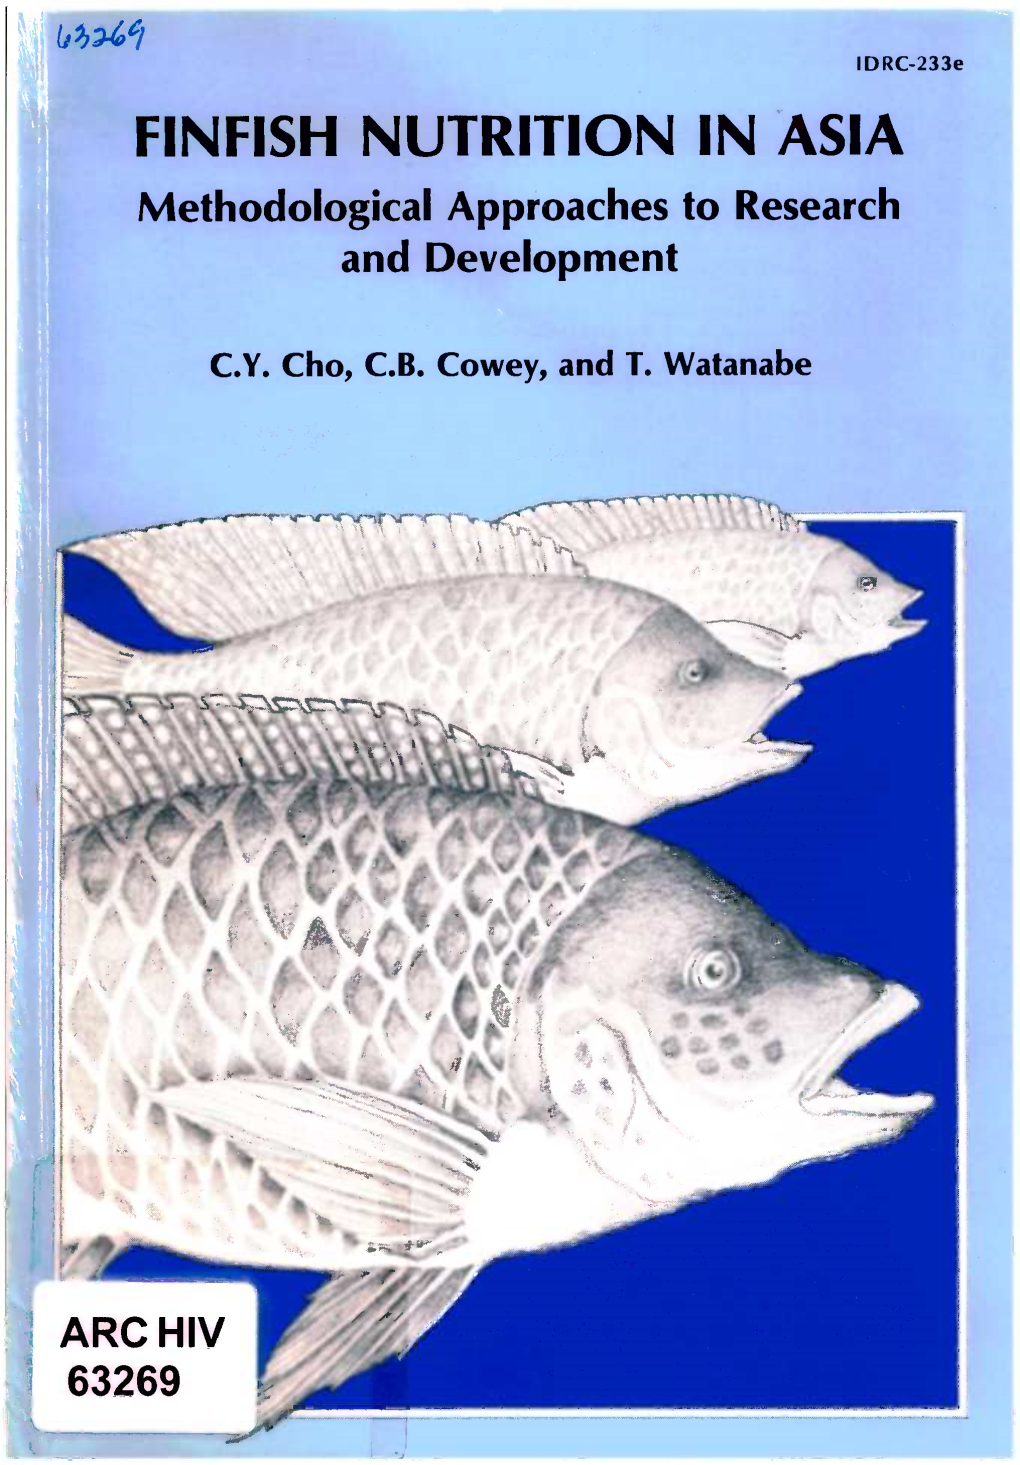 FINFISH NUTRITION in ASIA Methodological Approaches to Research and Development